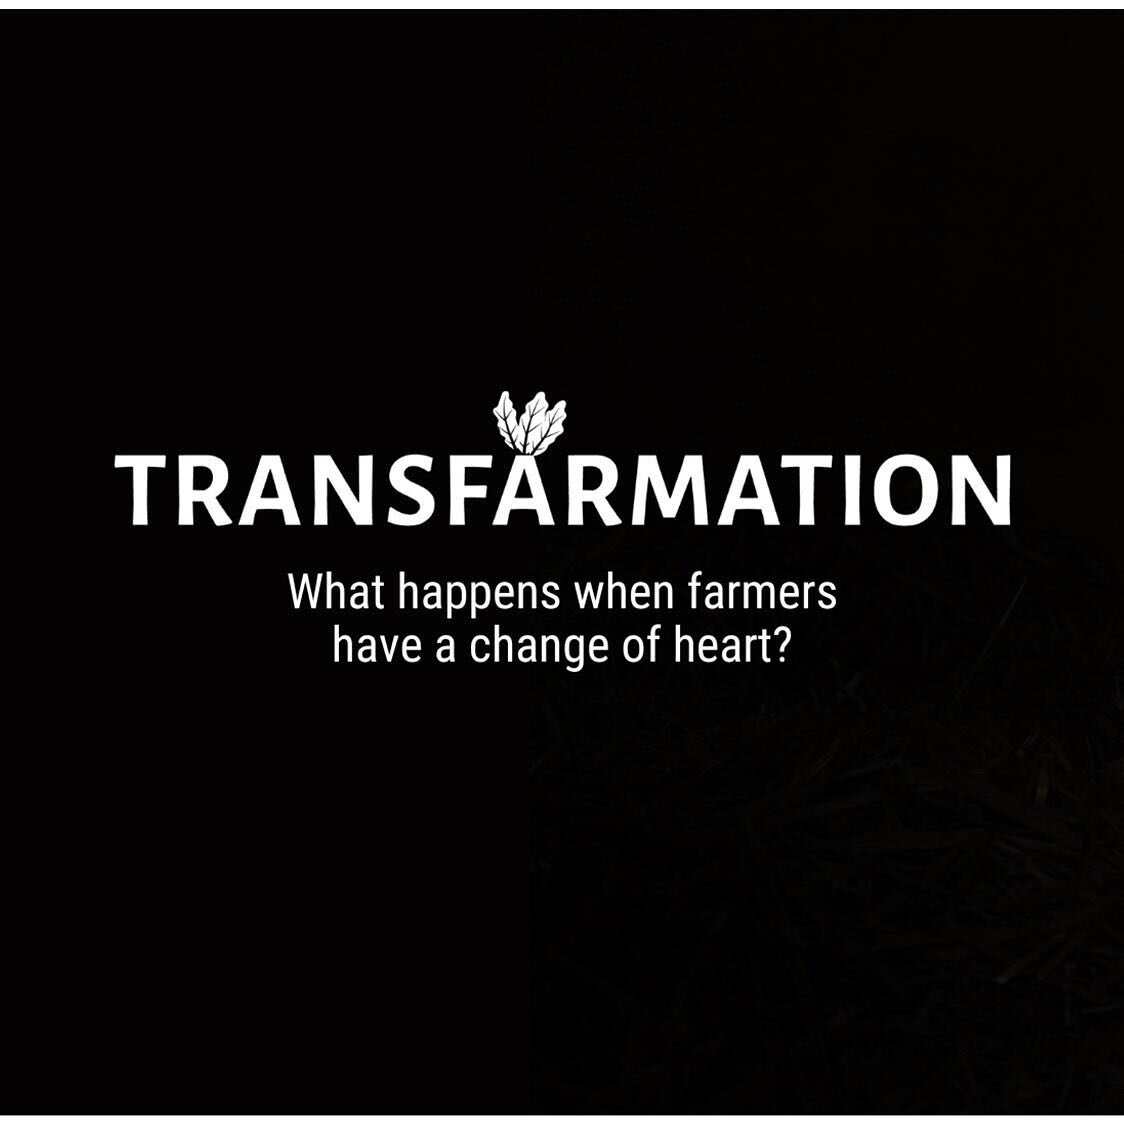 Transfarmation premieres today! Two premiere times to join at the link in my bio. I&rsquo;m blown away by the number of people who have already RSVP&rsquo;d. I can&rsquo;t wait to share this with all of you 🙏🏻 

Switzerland is proud of its image as